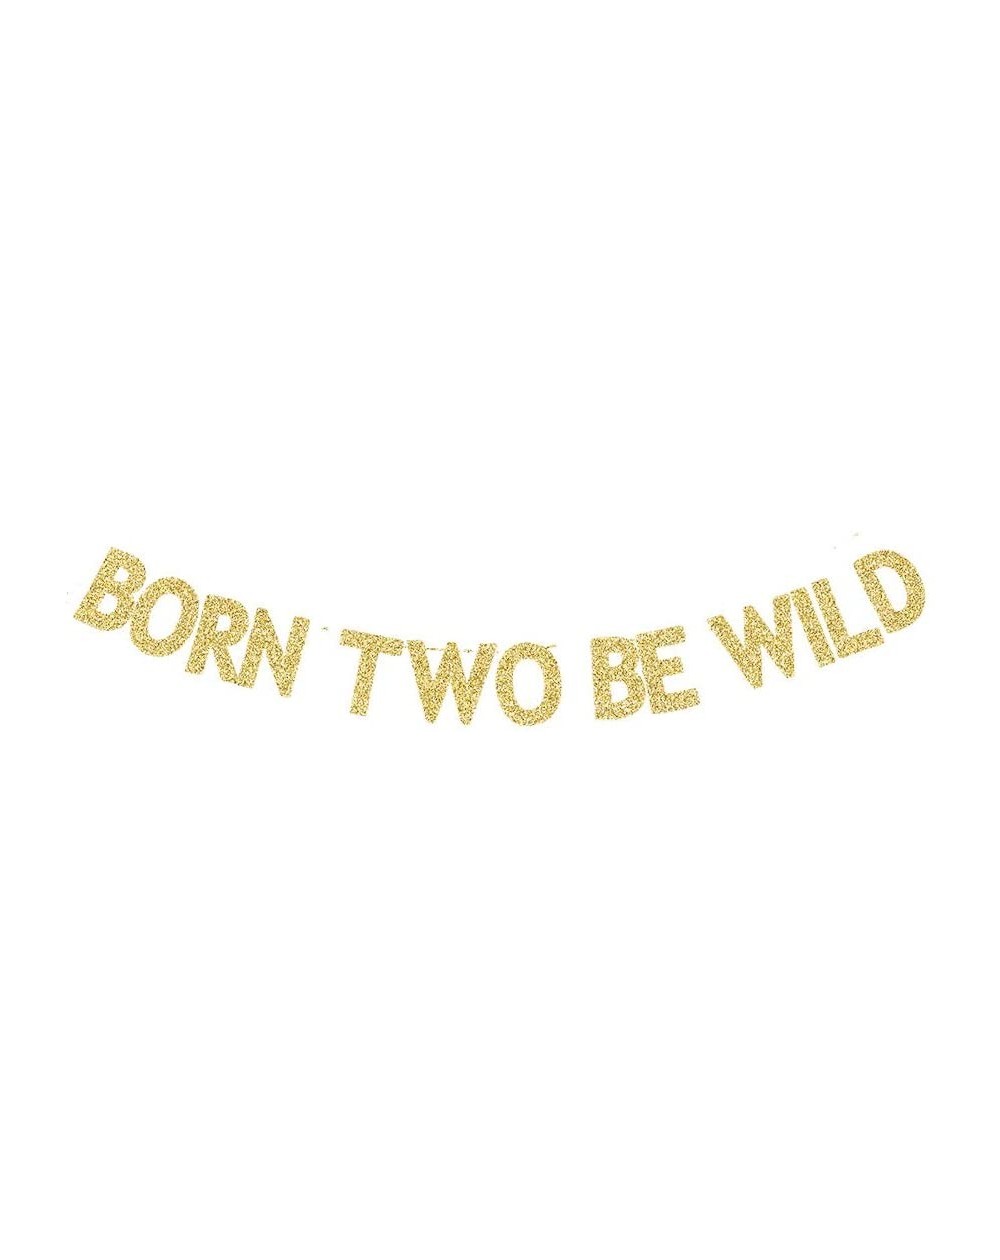 Banners & Garlands Born Two Be Wild Banner- Gold Gliter Paper Sign for Kids/Boys/Girls 2nd Birthday Party- Wild Themed 2nd Bd...